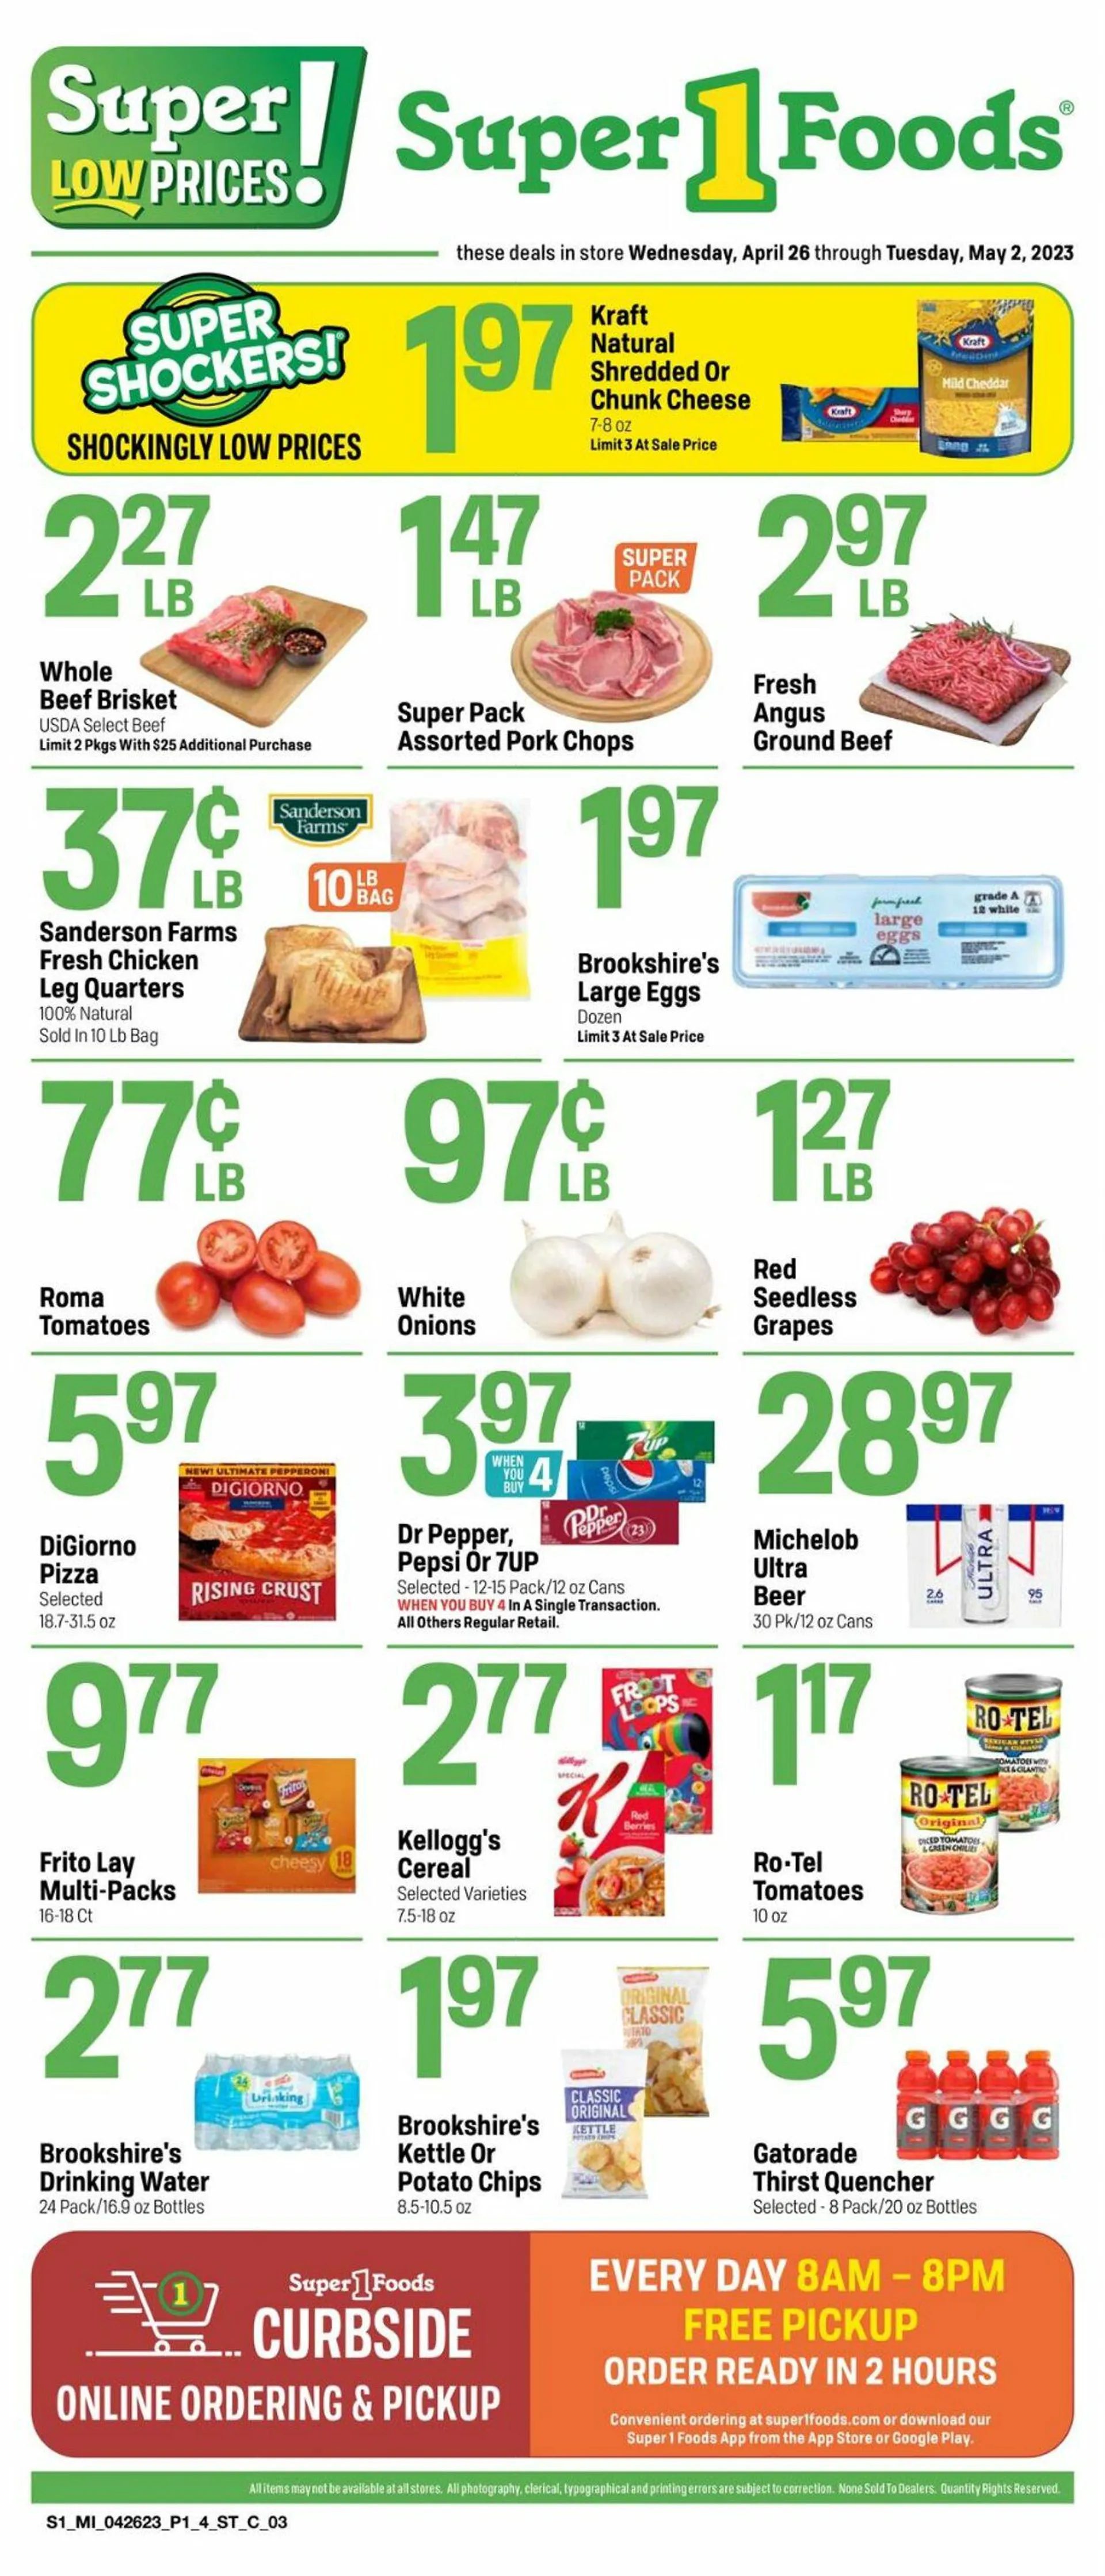 Super 1 Foods Current weekly ad - 1